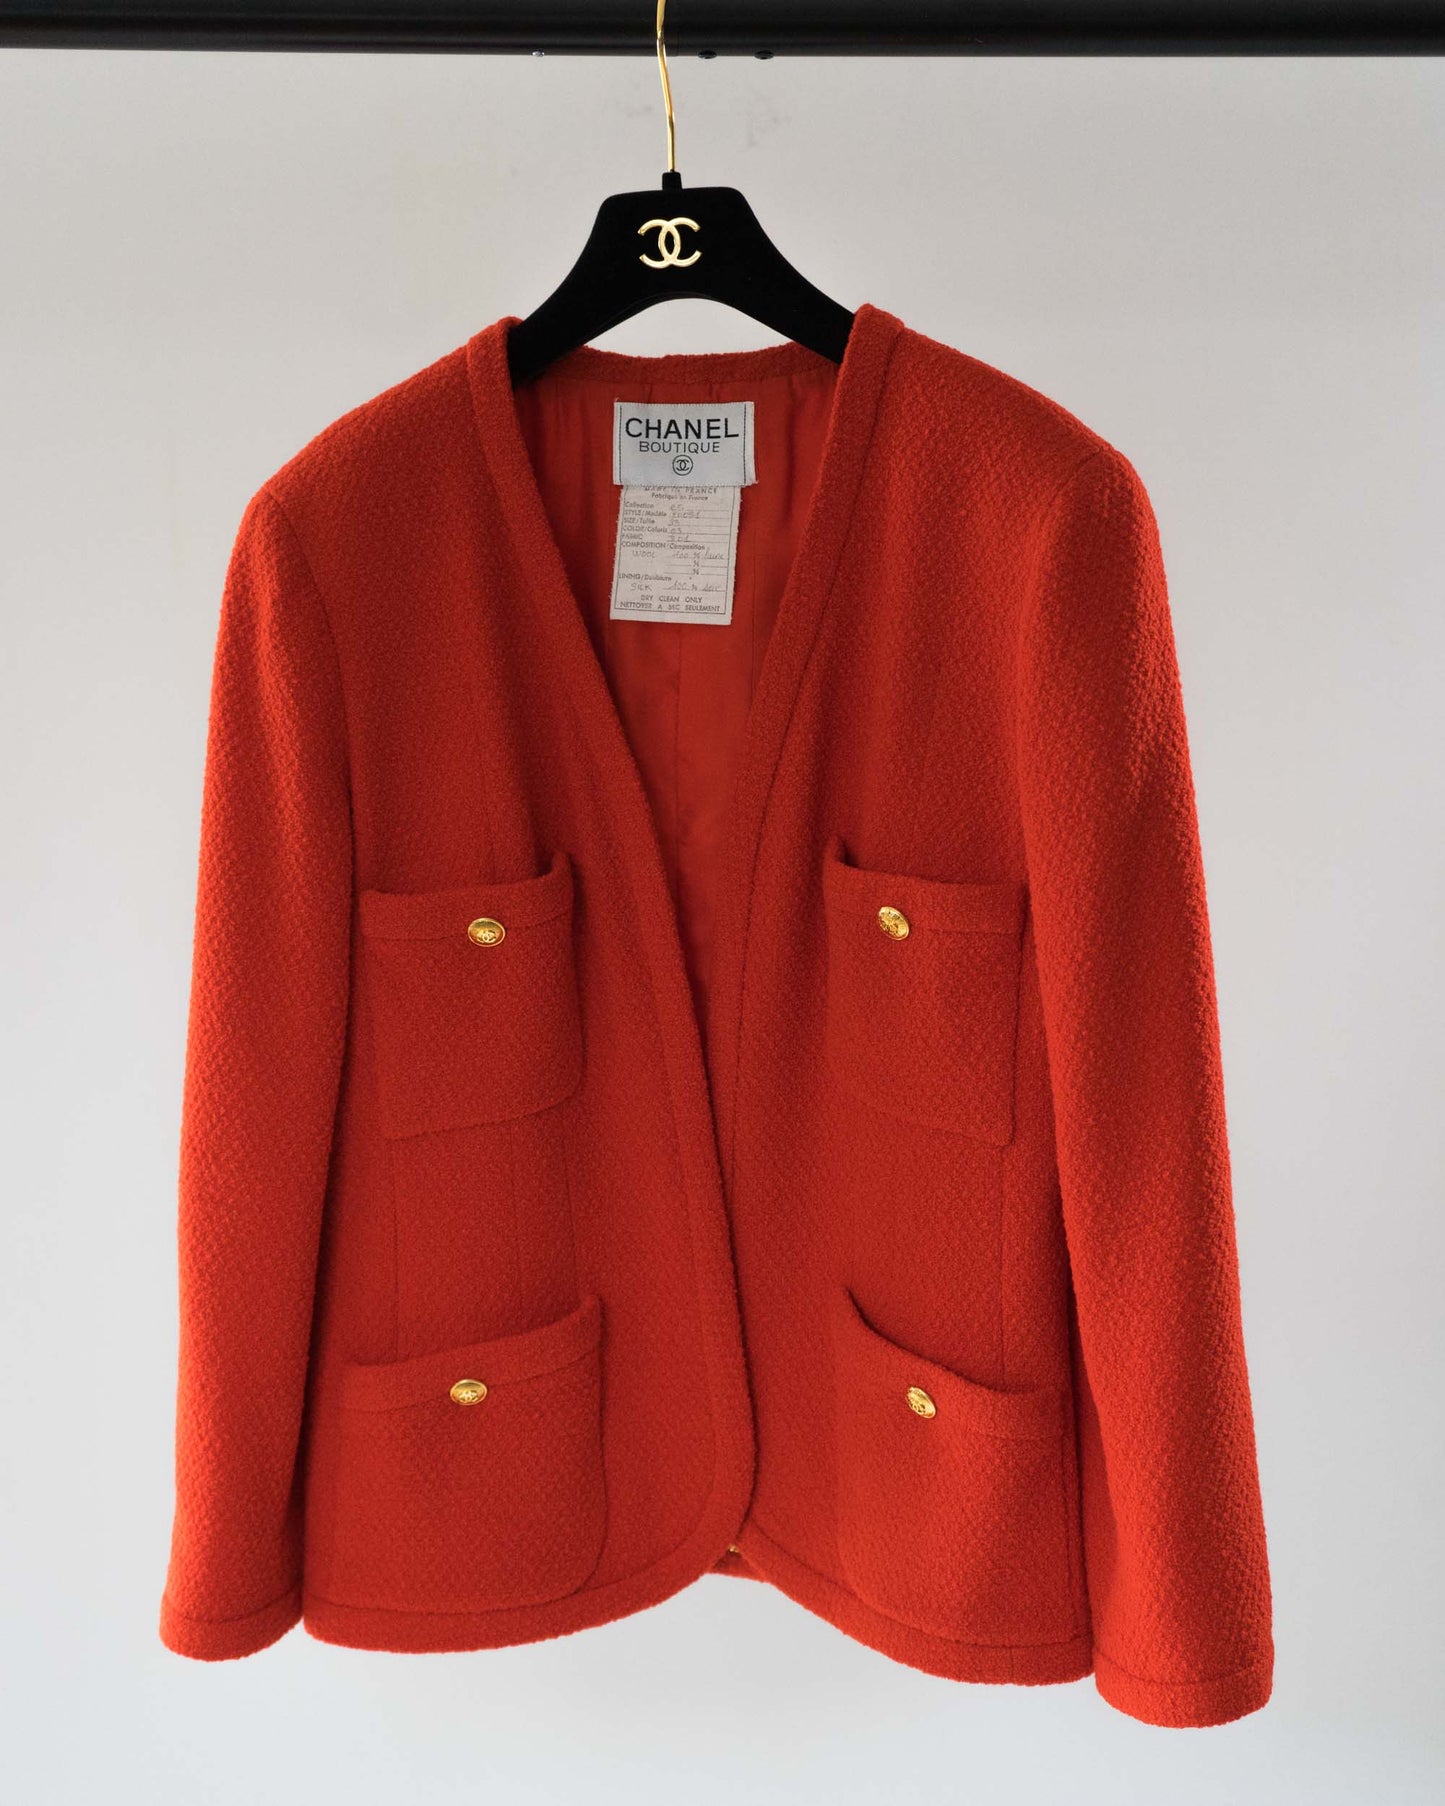 FR38-40 Chanel Spring 1991 Four Pocket Wool Boucle Collarless Jacket in Red